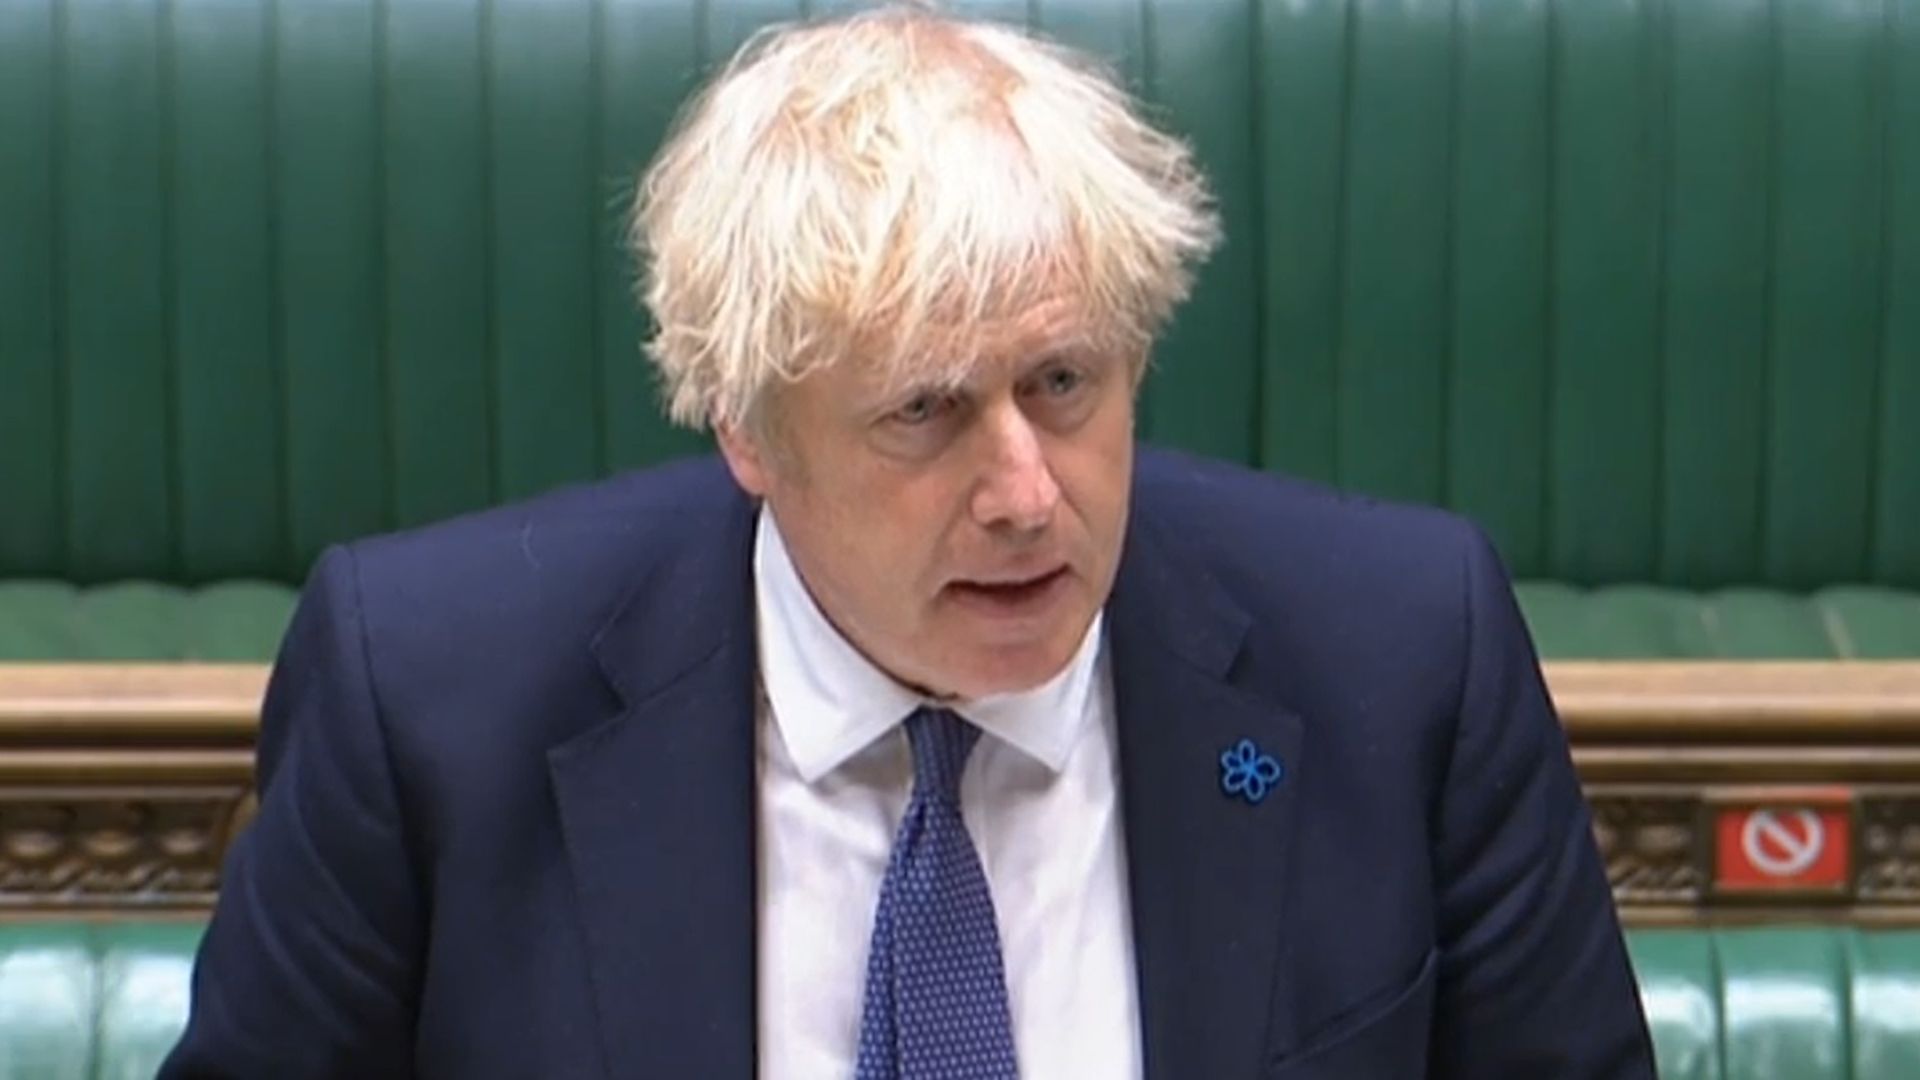 Boris Johnson at PMQs in the House of Commons - Credit: Parliament Live